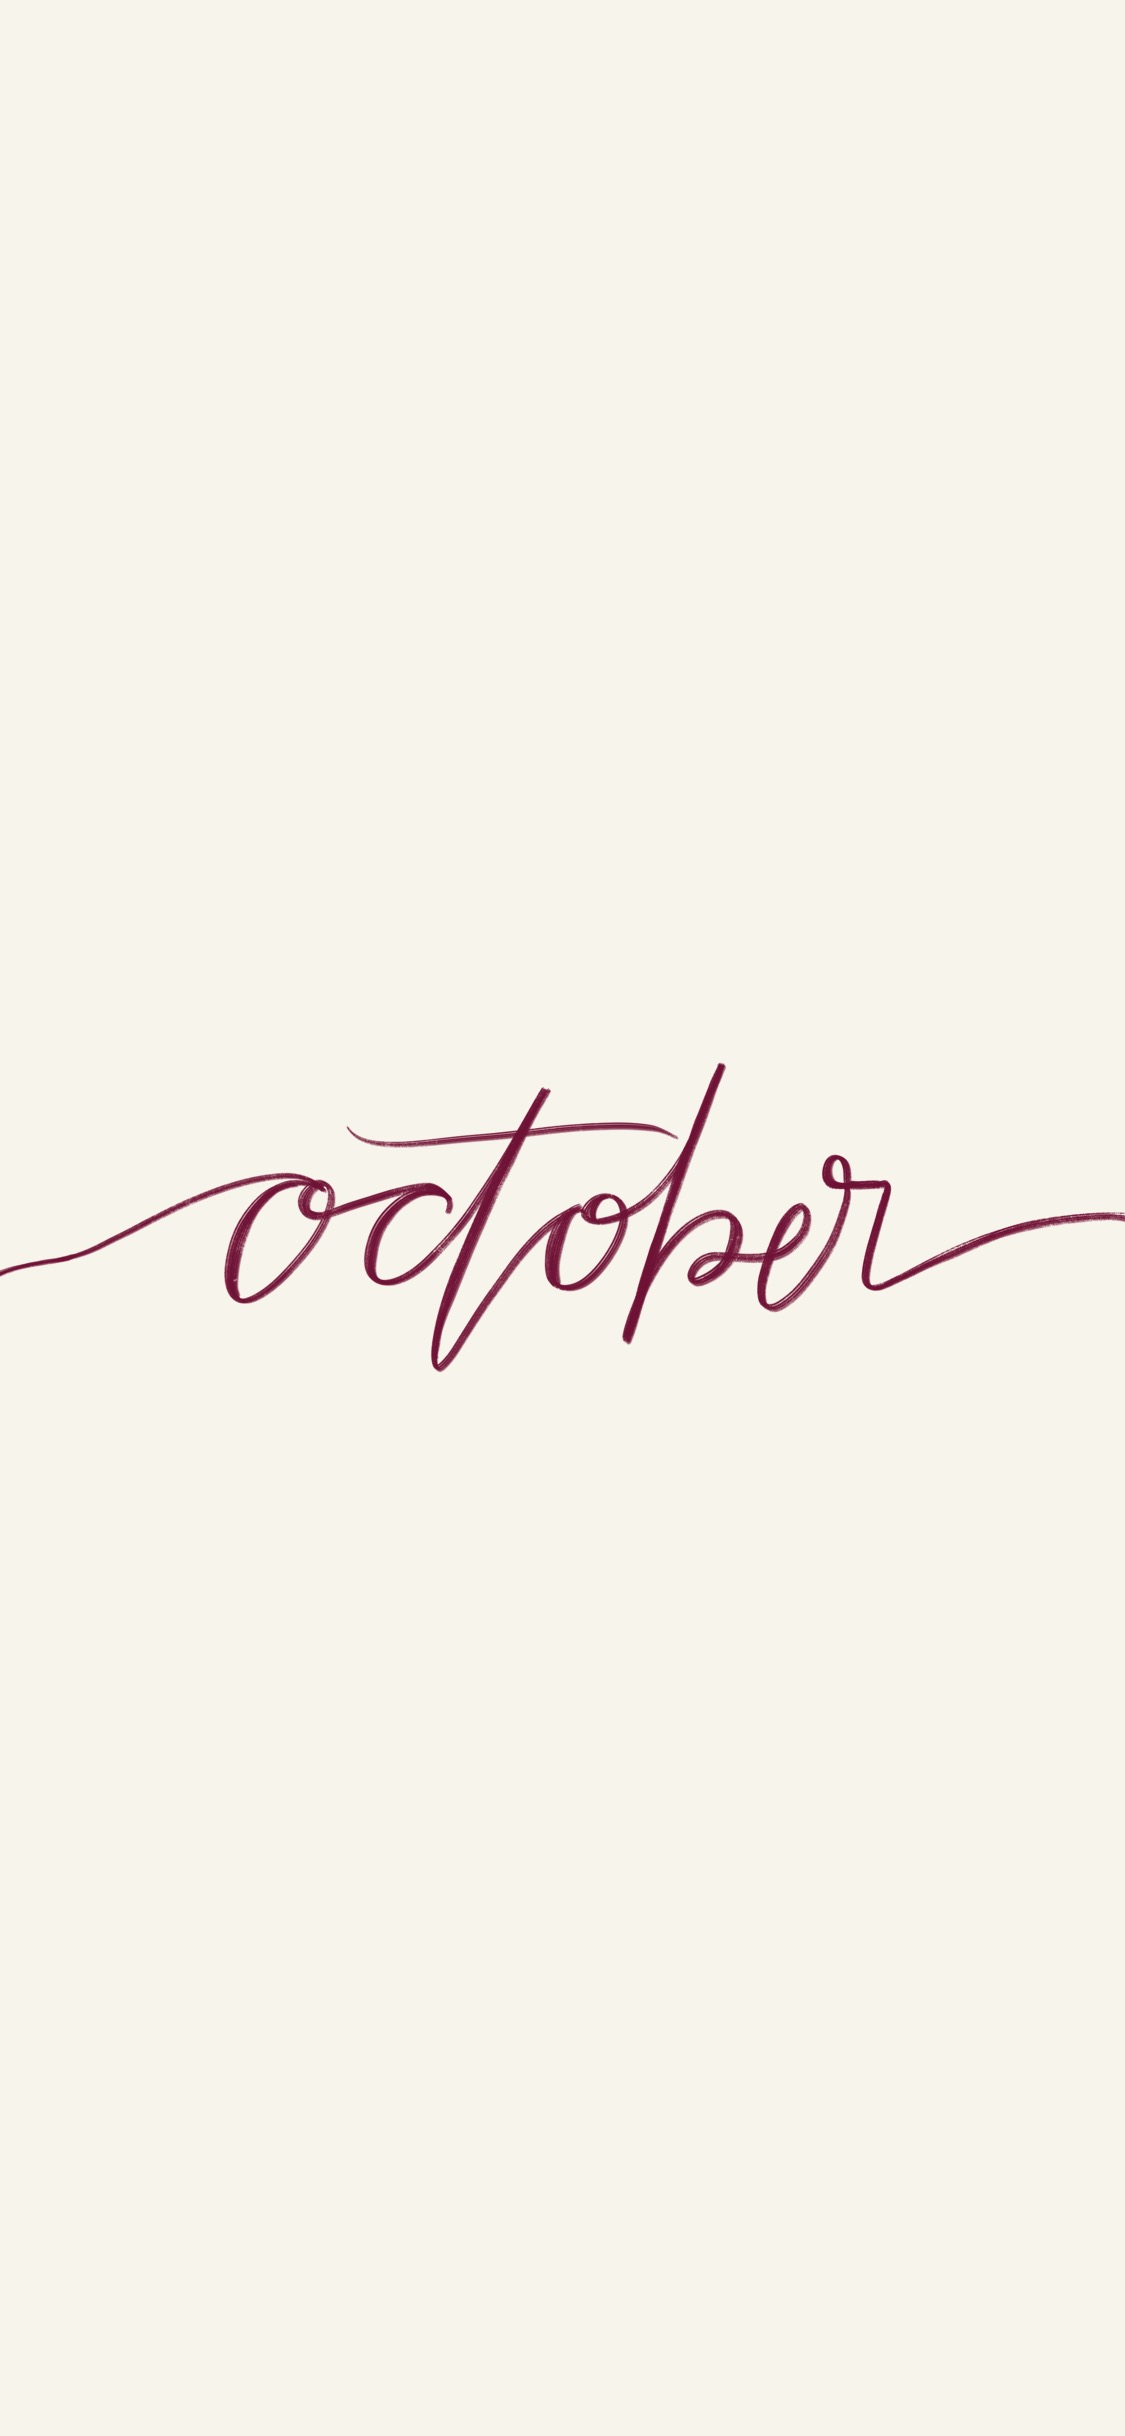 October Backgrounds for iPhone, Desktop and Tablet - Welcome